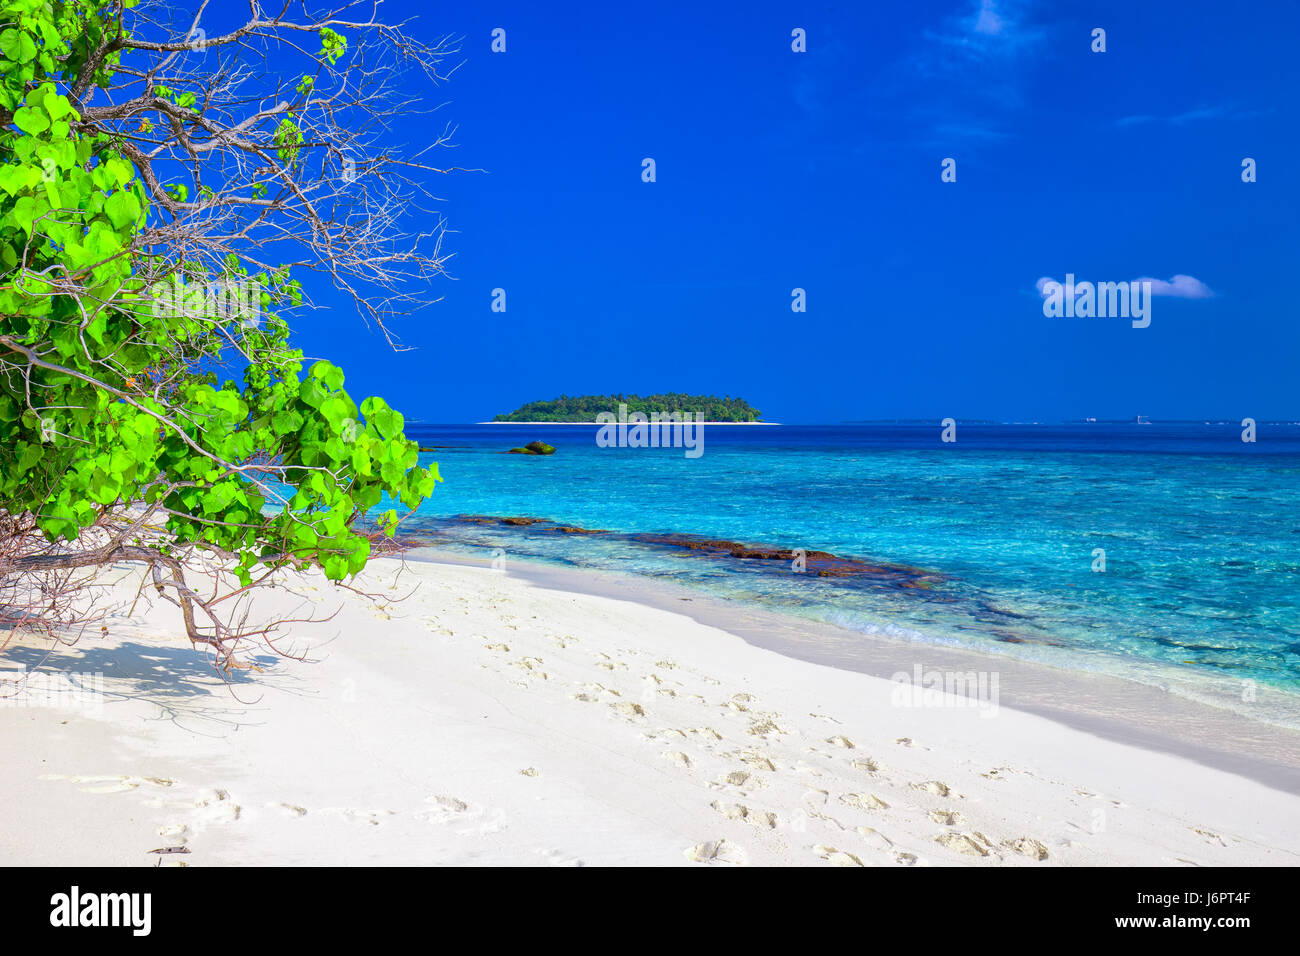 Tropical island with sandy beach, overwater bungalows and tourquise clear water, Maldives Stock Photo